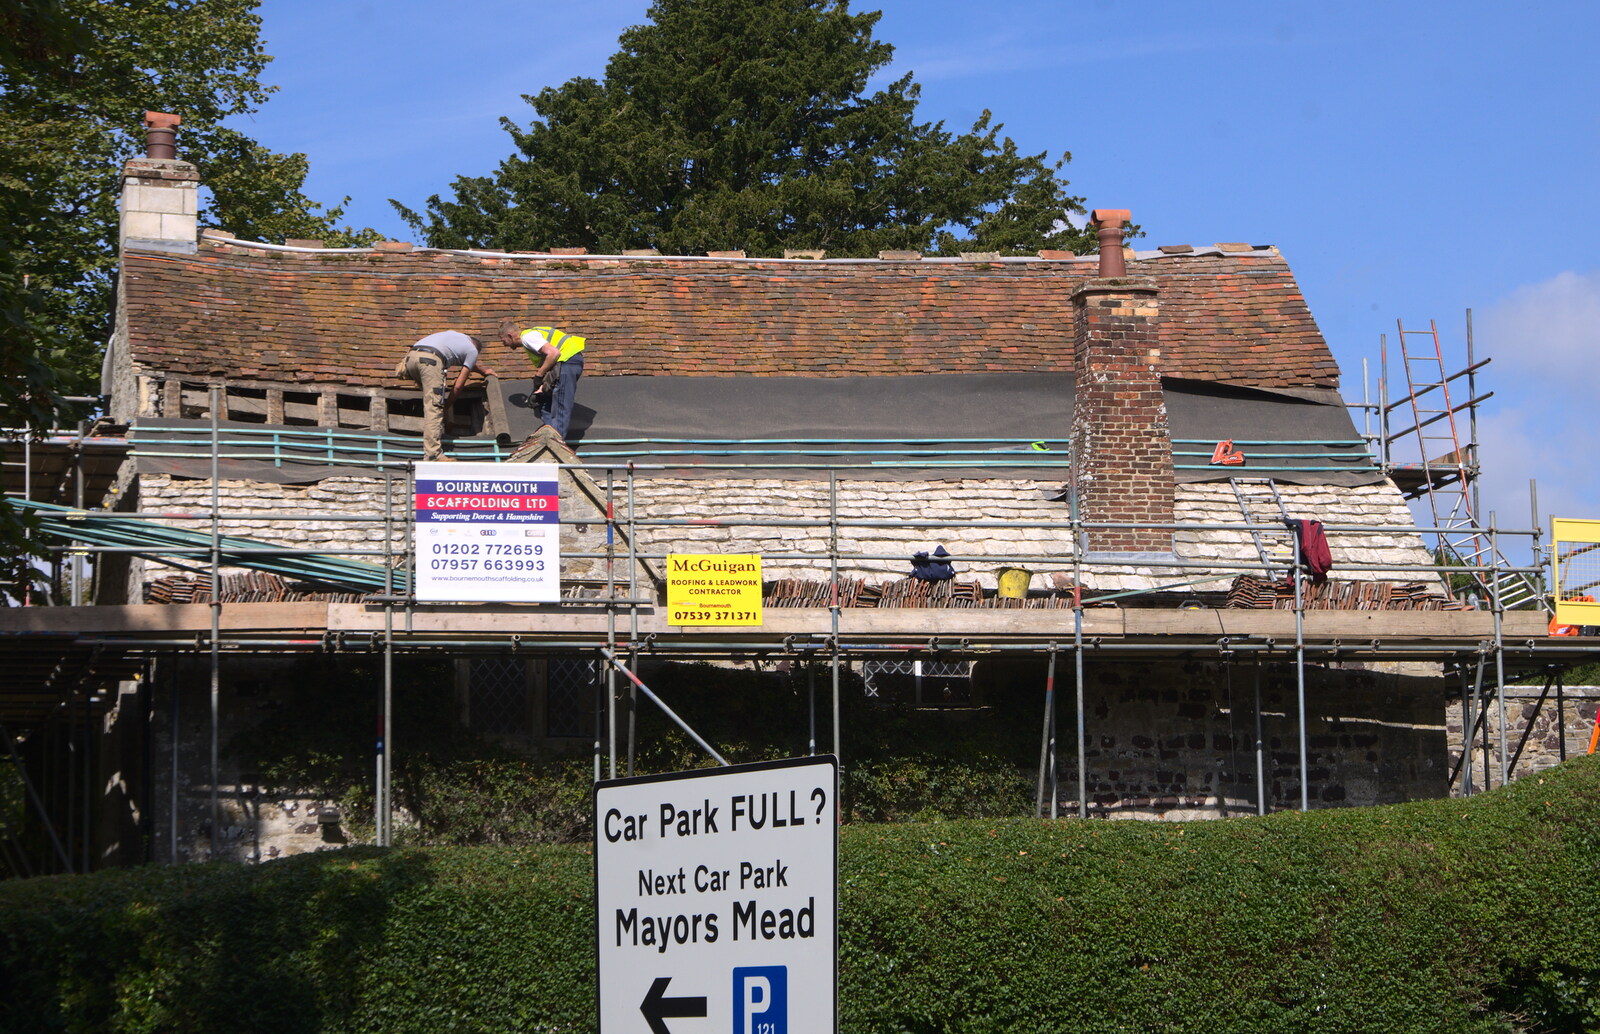 Renovation occurs on an old building near the priory from Grandmother's Wake, Winkton, Christchurch, Dorset - 18th September 2017